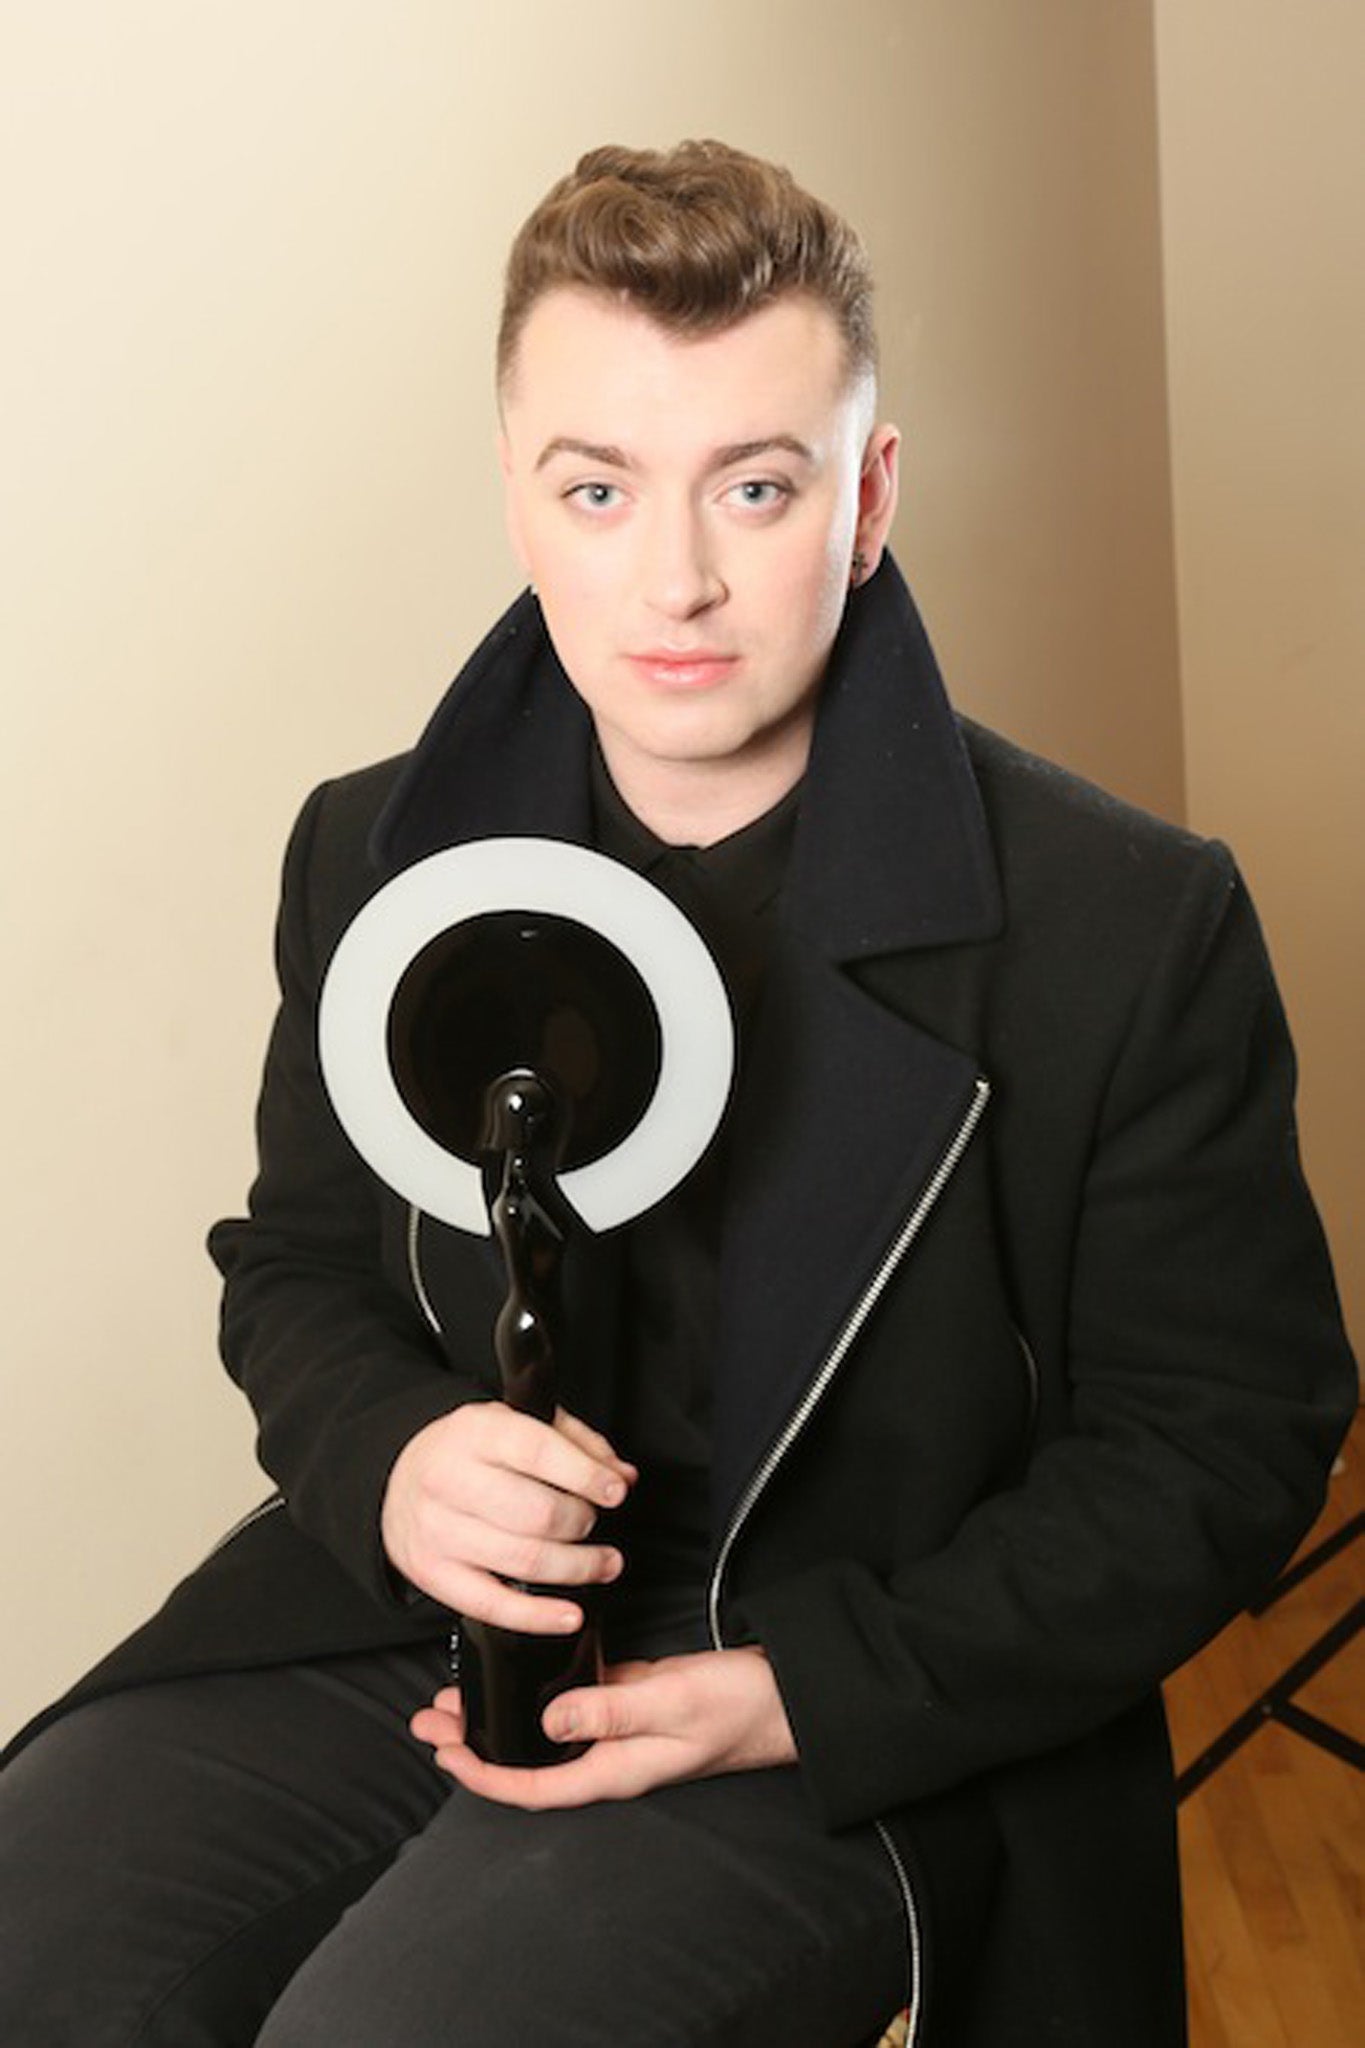 Sam Smith, who has been tipped for success in 2014, with his Critics' Choice Award